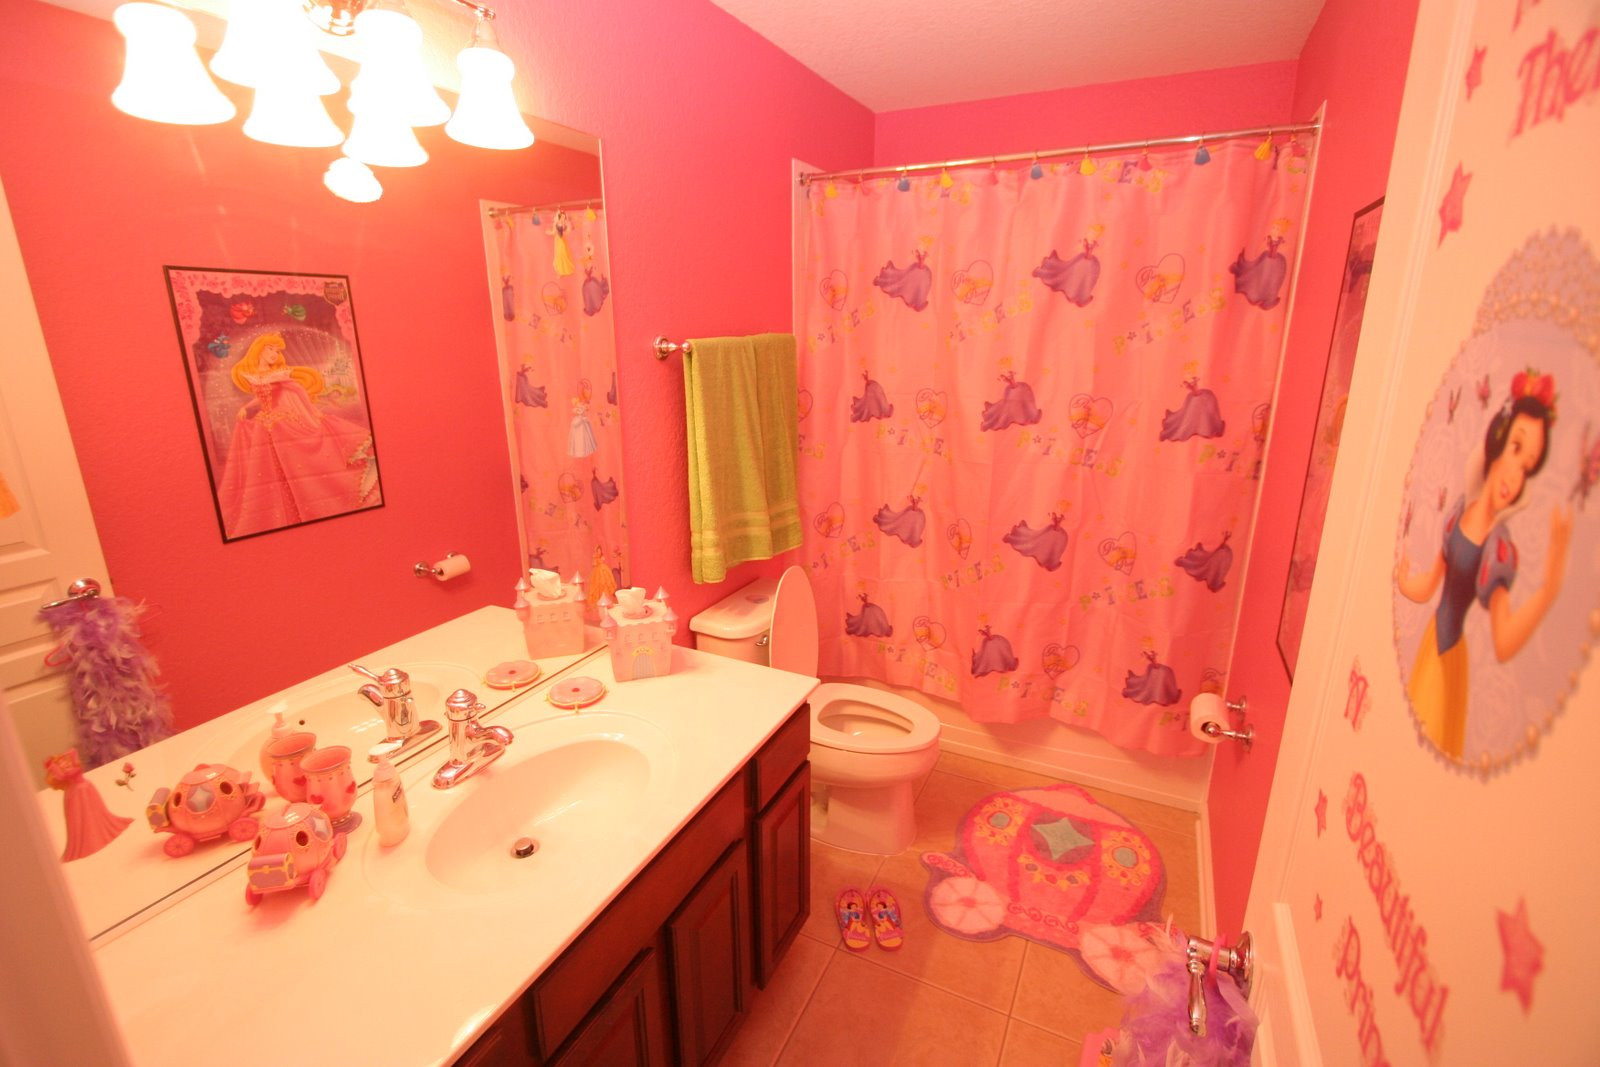 Disney Bathroom Decor
 House in the Heights Guest Post The Vanity Room